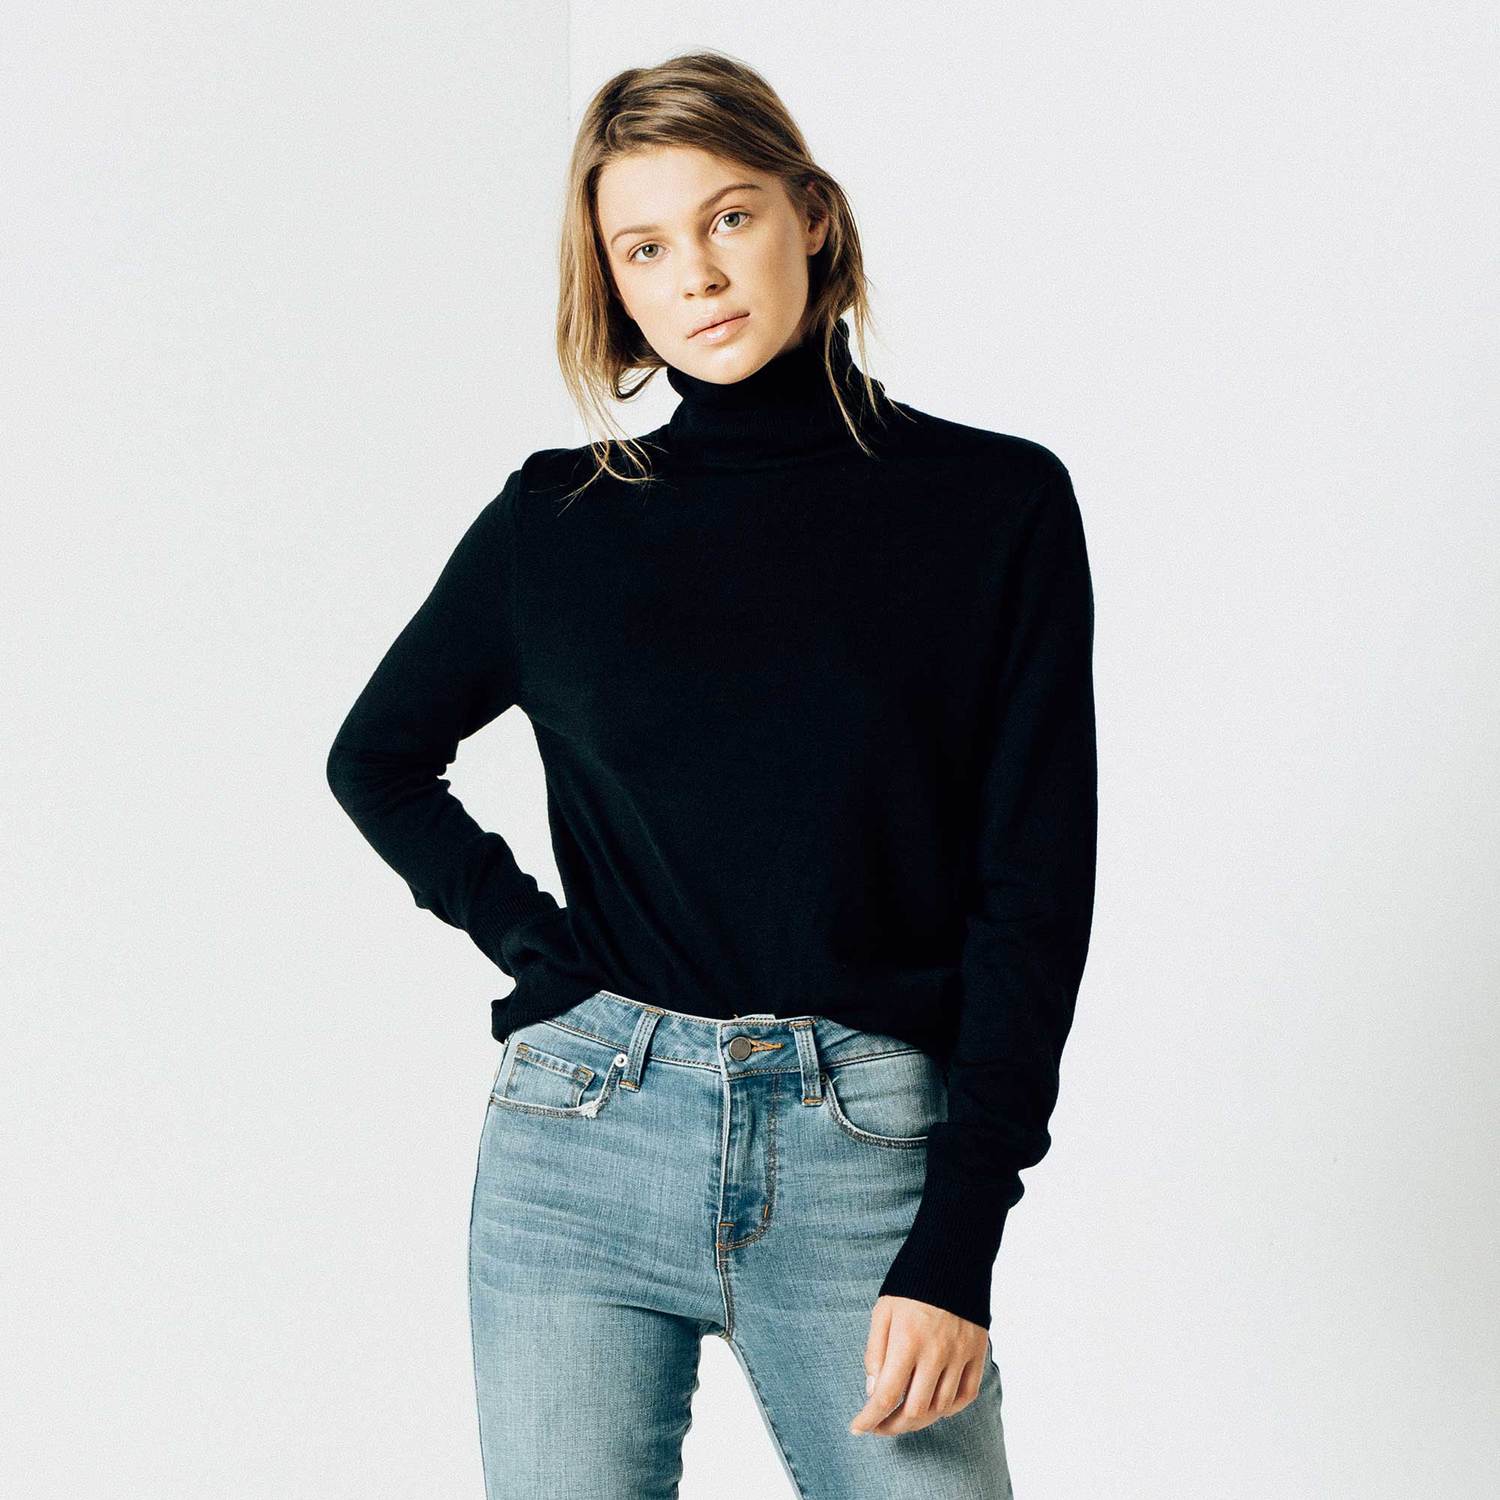 Turtleneck Sweater for Women in exclusive materials and designs